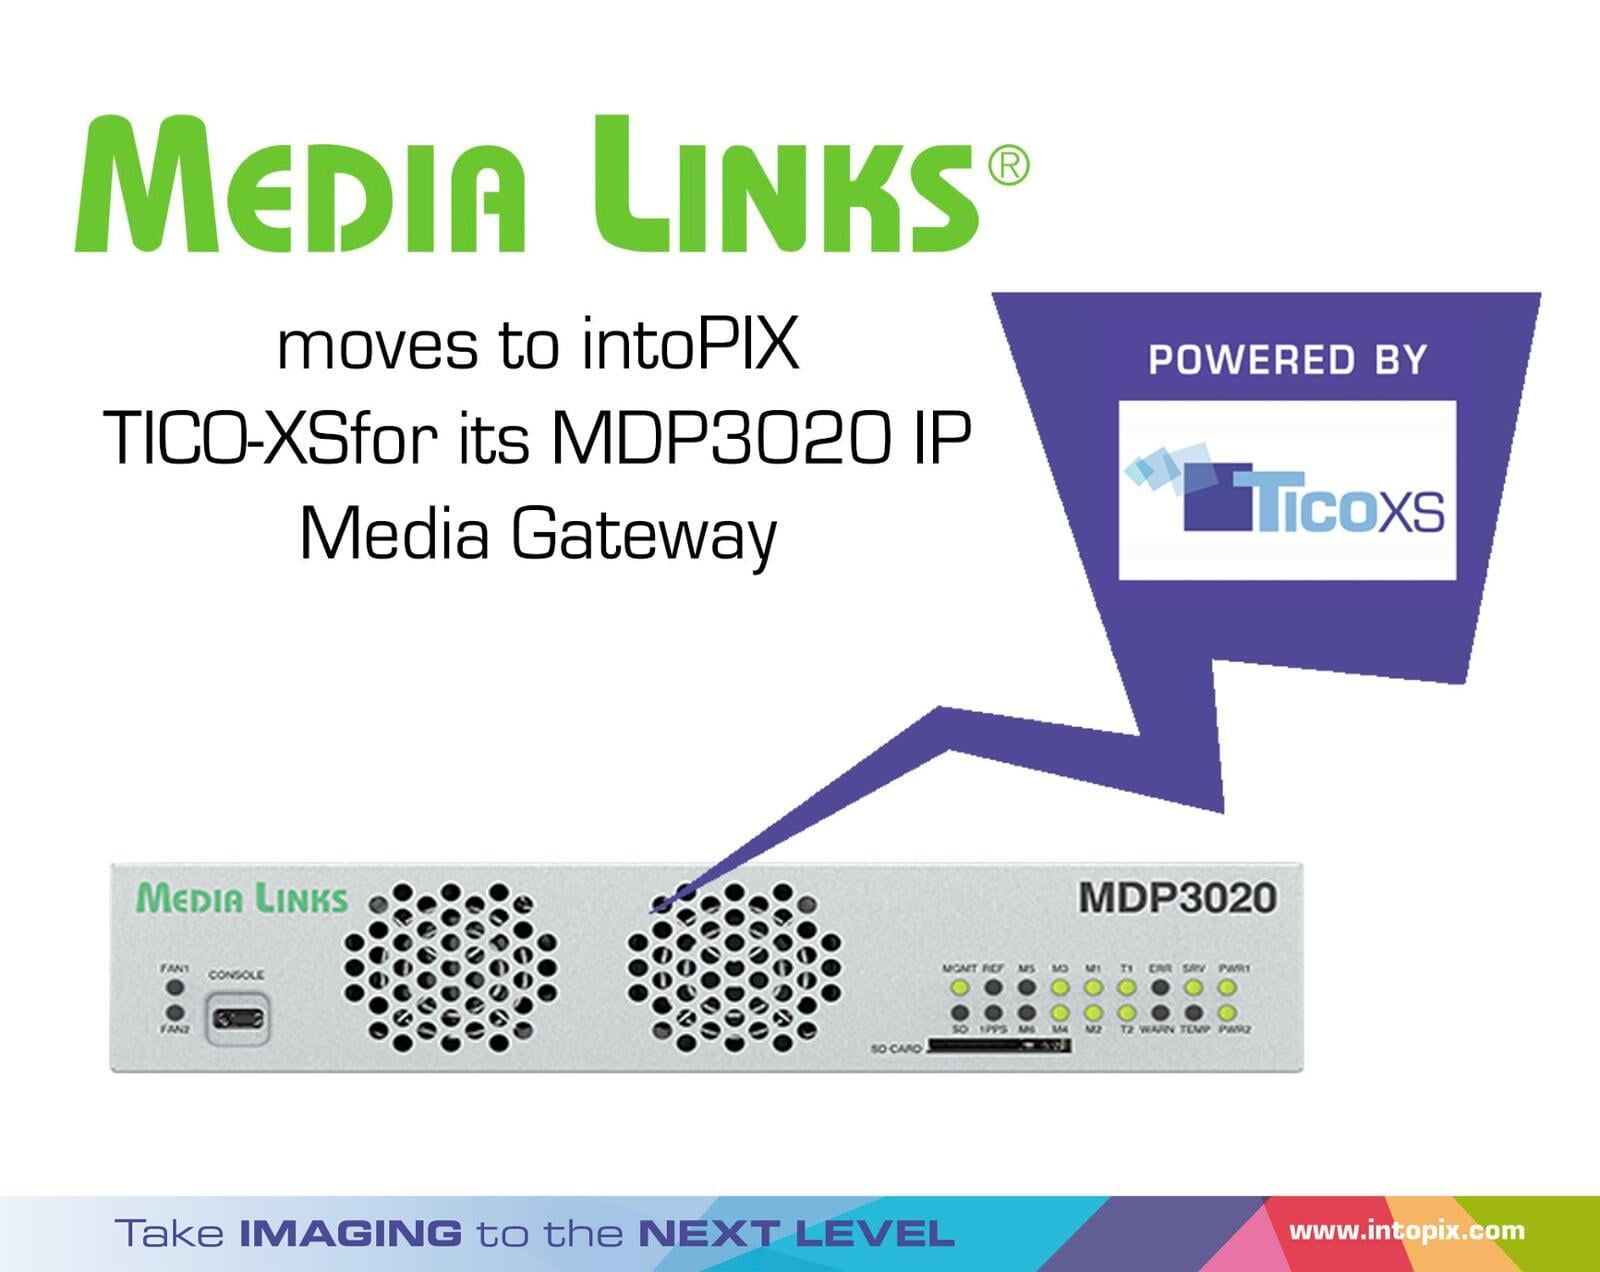 Media Links moves to intoPIX TICO-XS for its MDP3020 IP Media Gateway